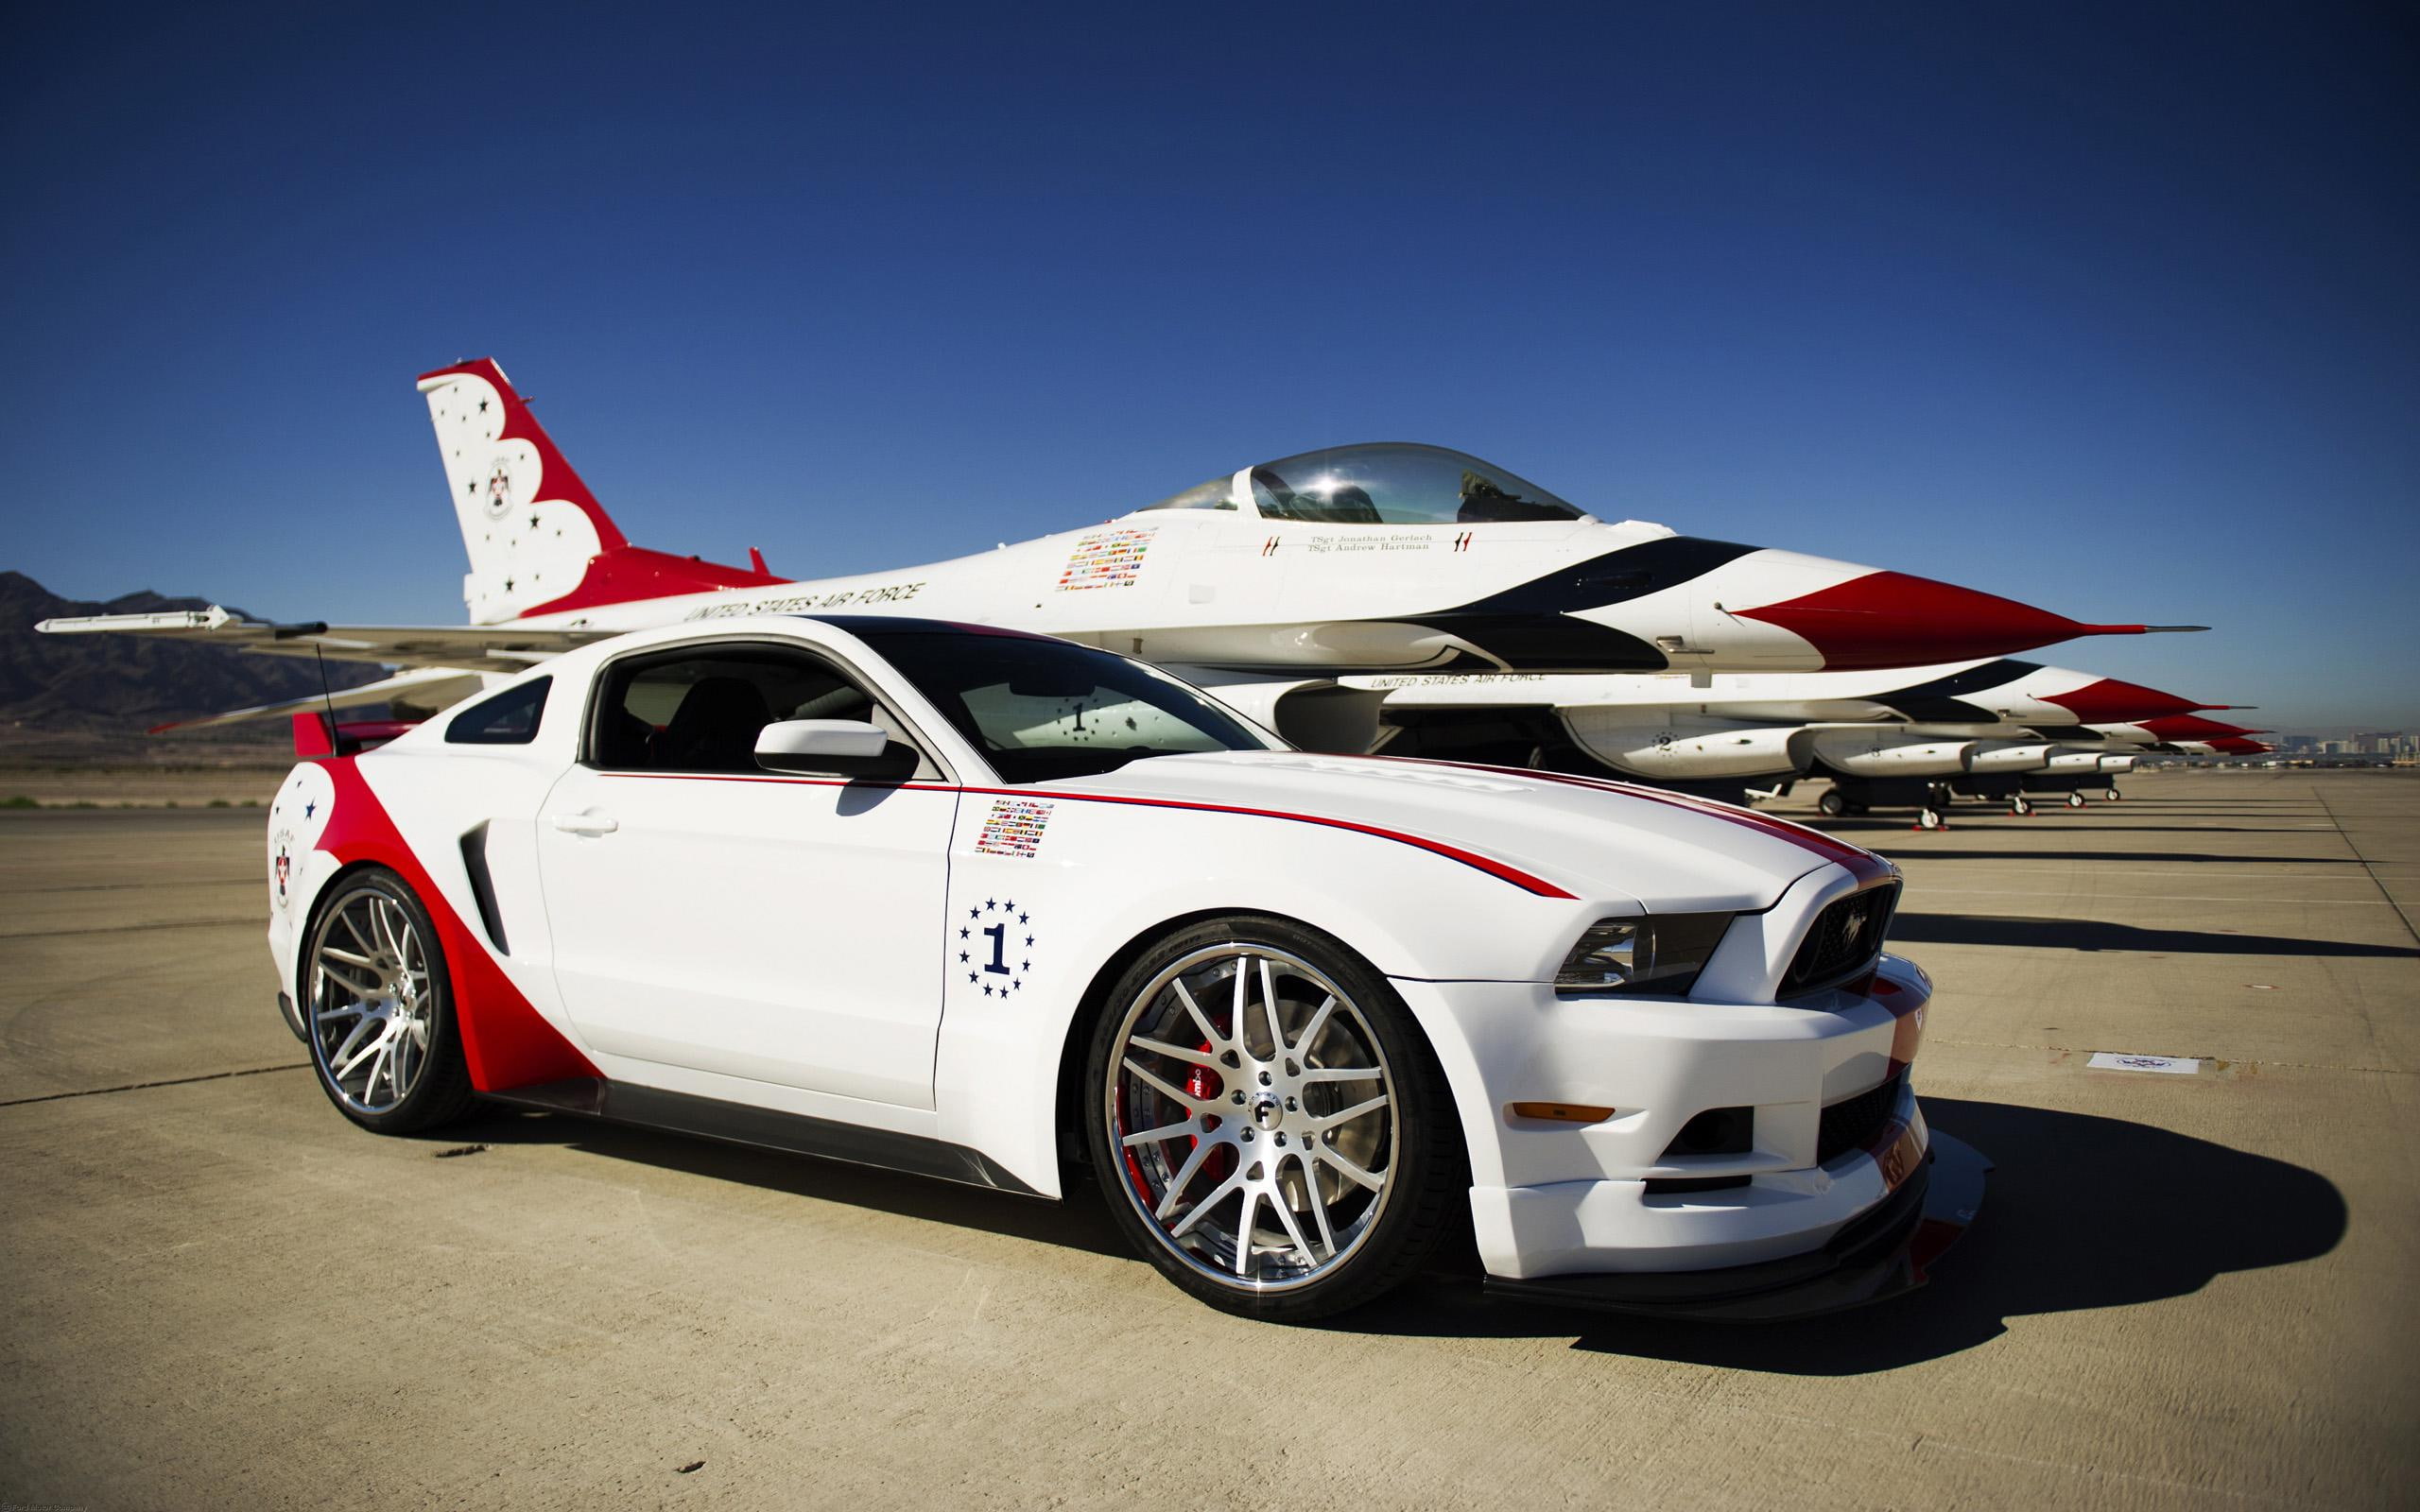 2014 Ford Mustang GT US Air Force Thunderbirds Edition, white and red coupe